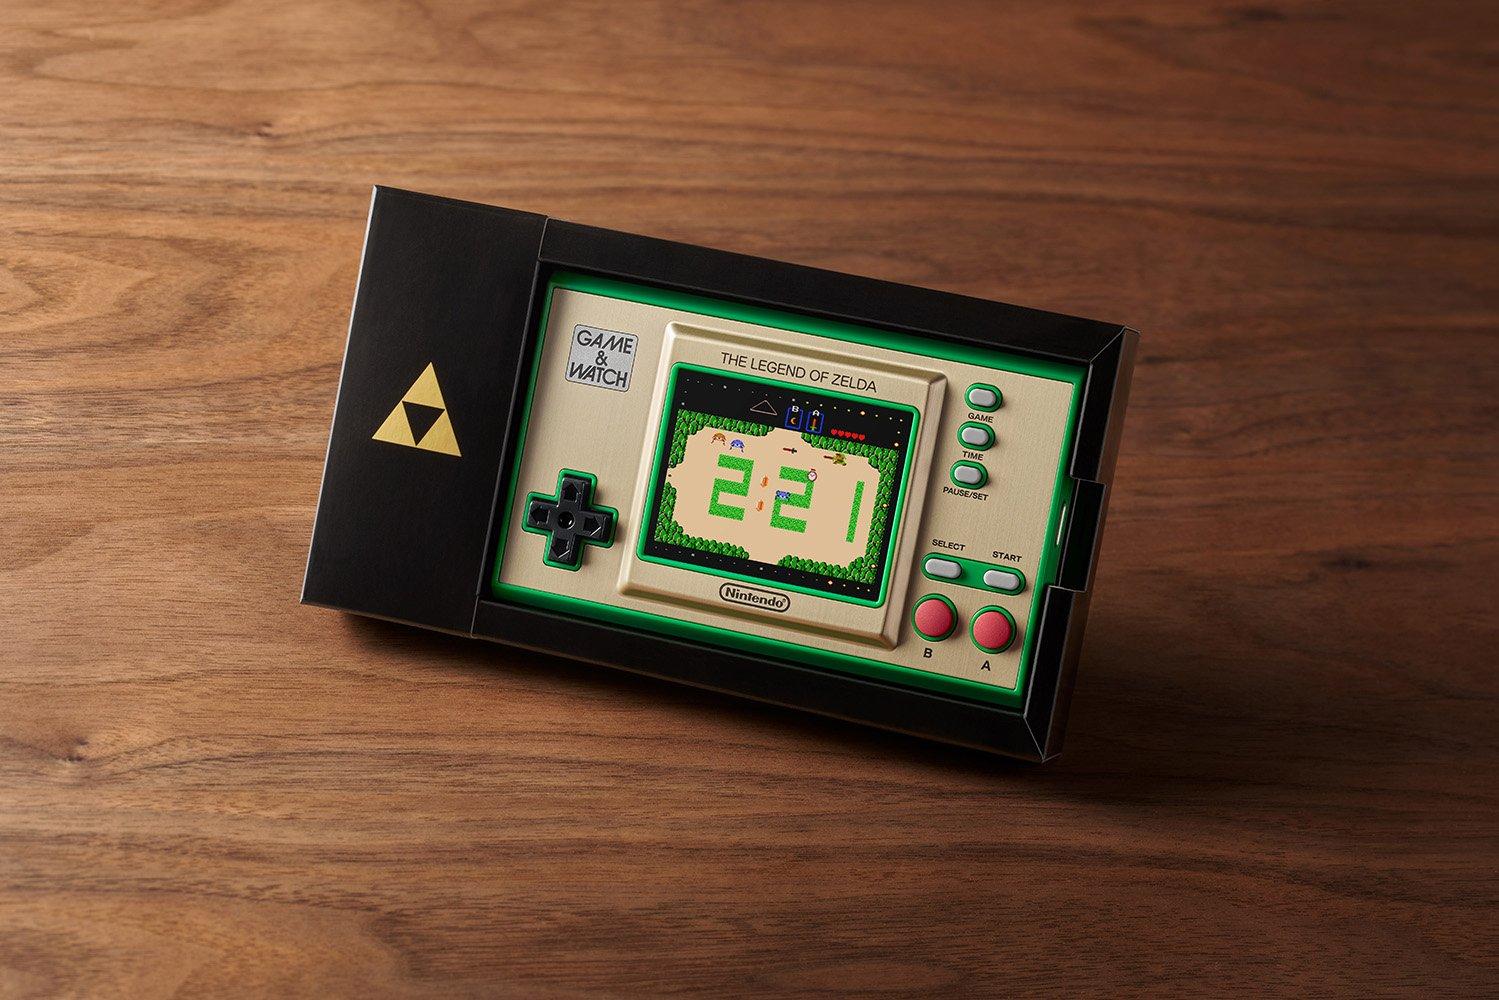 list item 3 of 17 Game and Watch: The Legend of Zelda